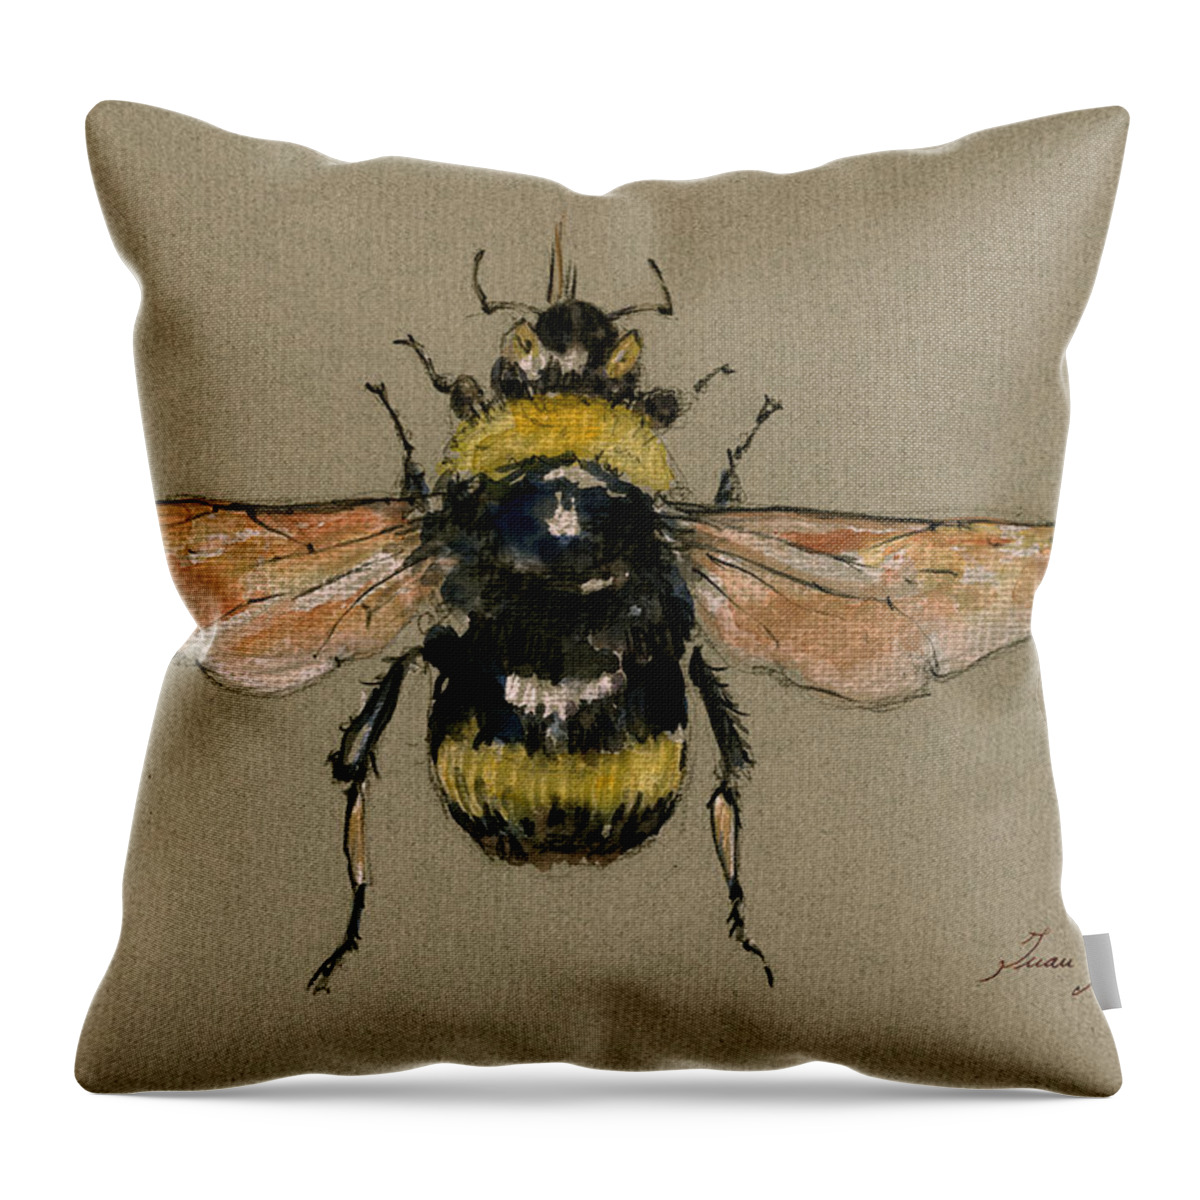 Bumble Bee Throw Pillow featuring the painting Bumble bee art wall by Juan Bosco